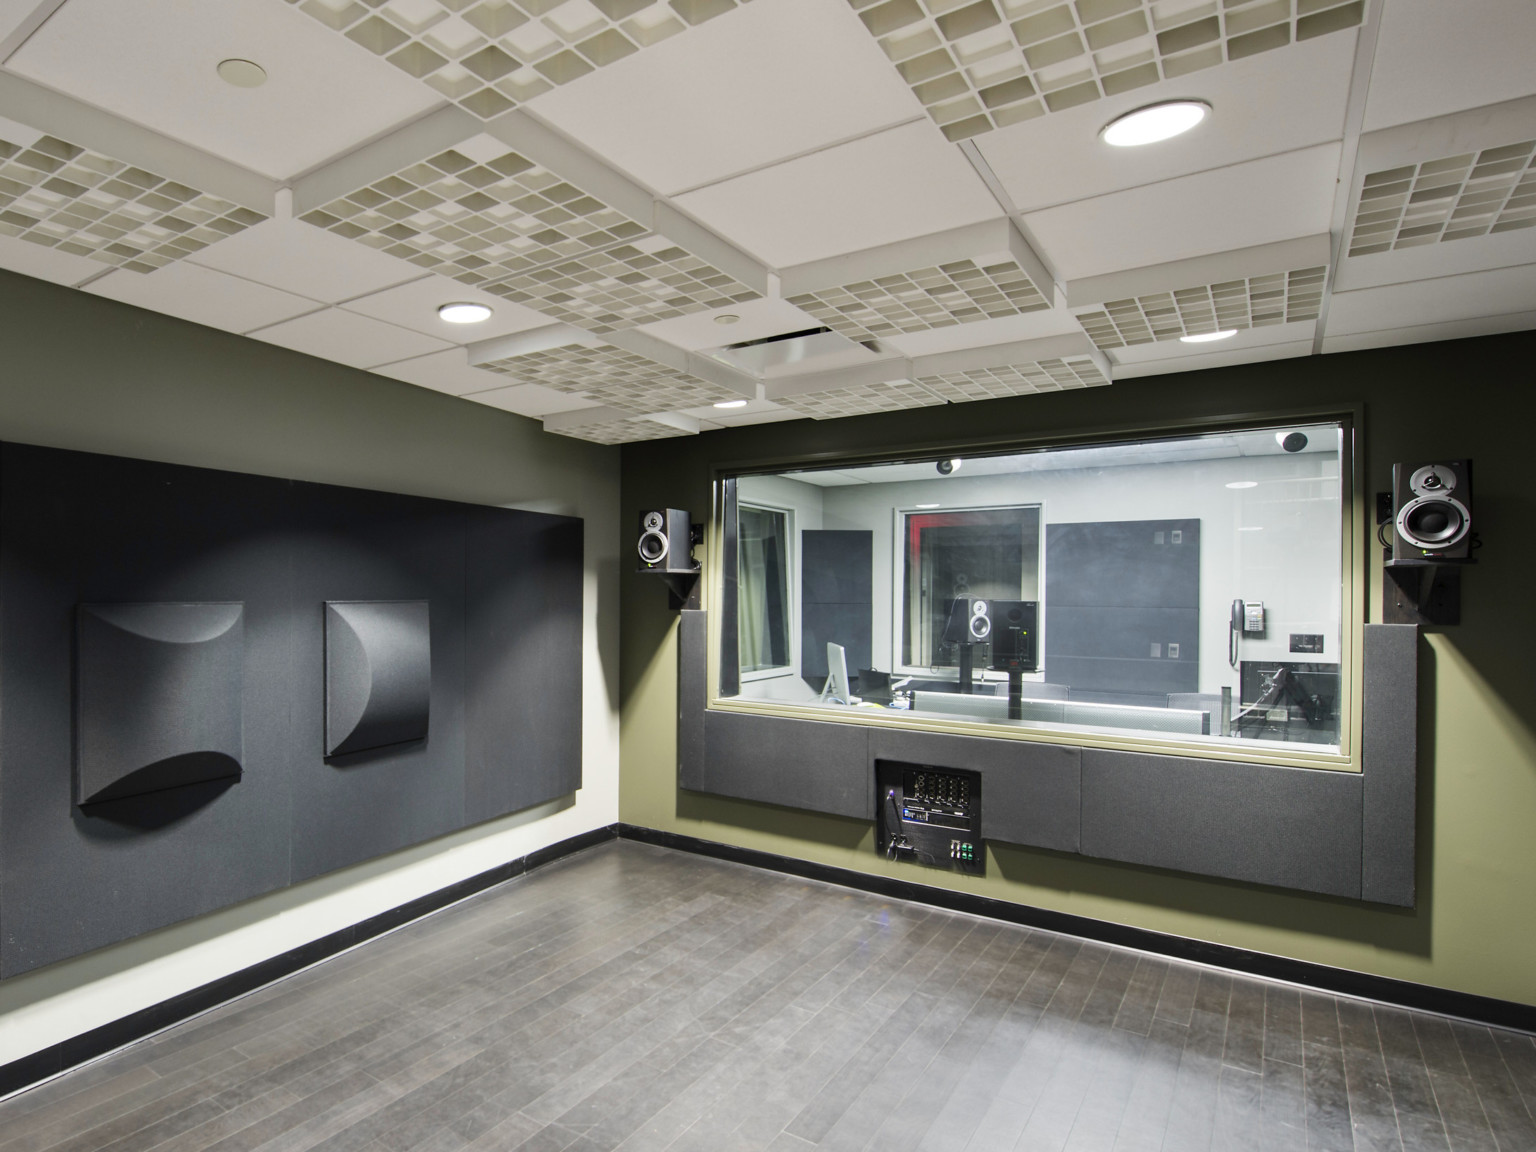 Green room with black acoustic wall panels and cream colored panels on the ceiling, and a window looks into control room